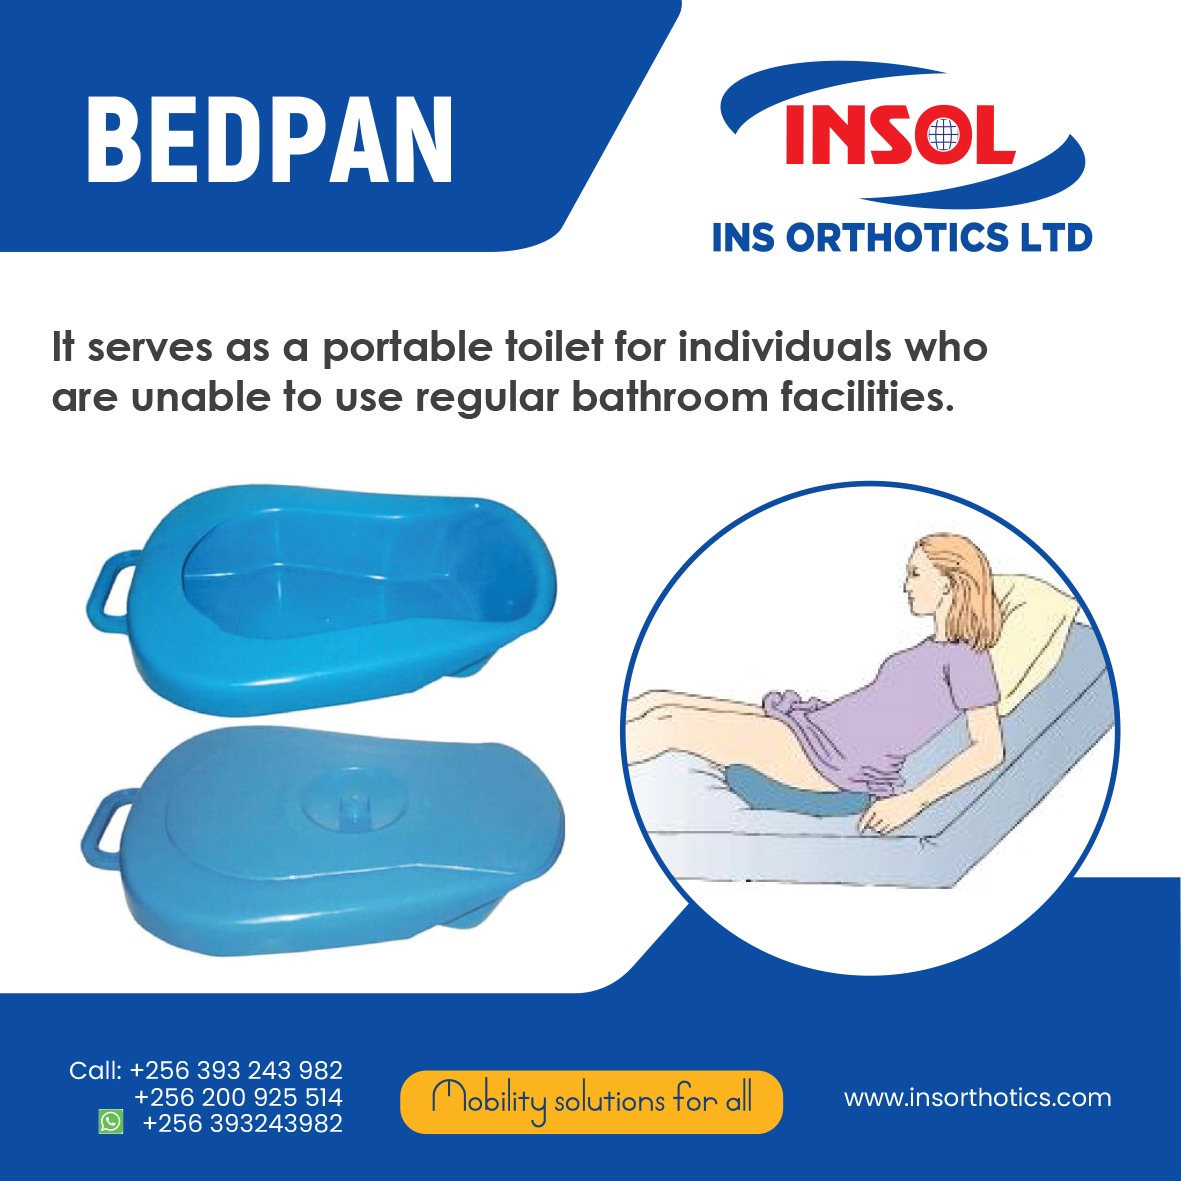 A bedpan is a portable container used for collecting urine or feces from someone who is unable to use a toilet. It is used by individuals who are bedridden, have limited mobility, or are unable to easily access a bathroom due to medical conditions or physical limitations.